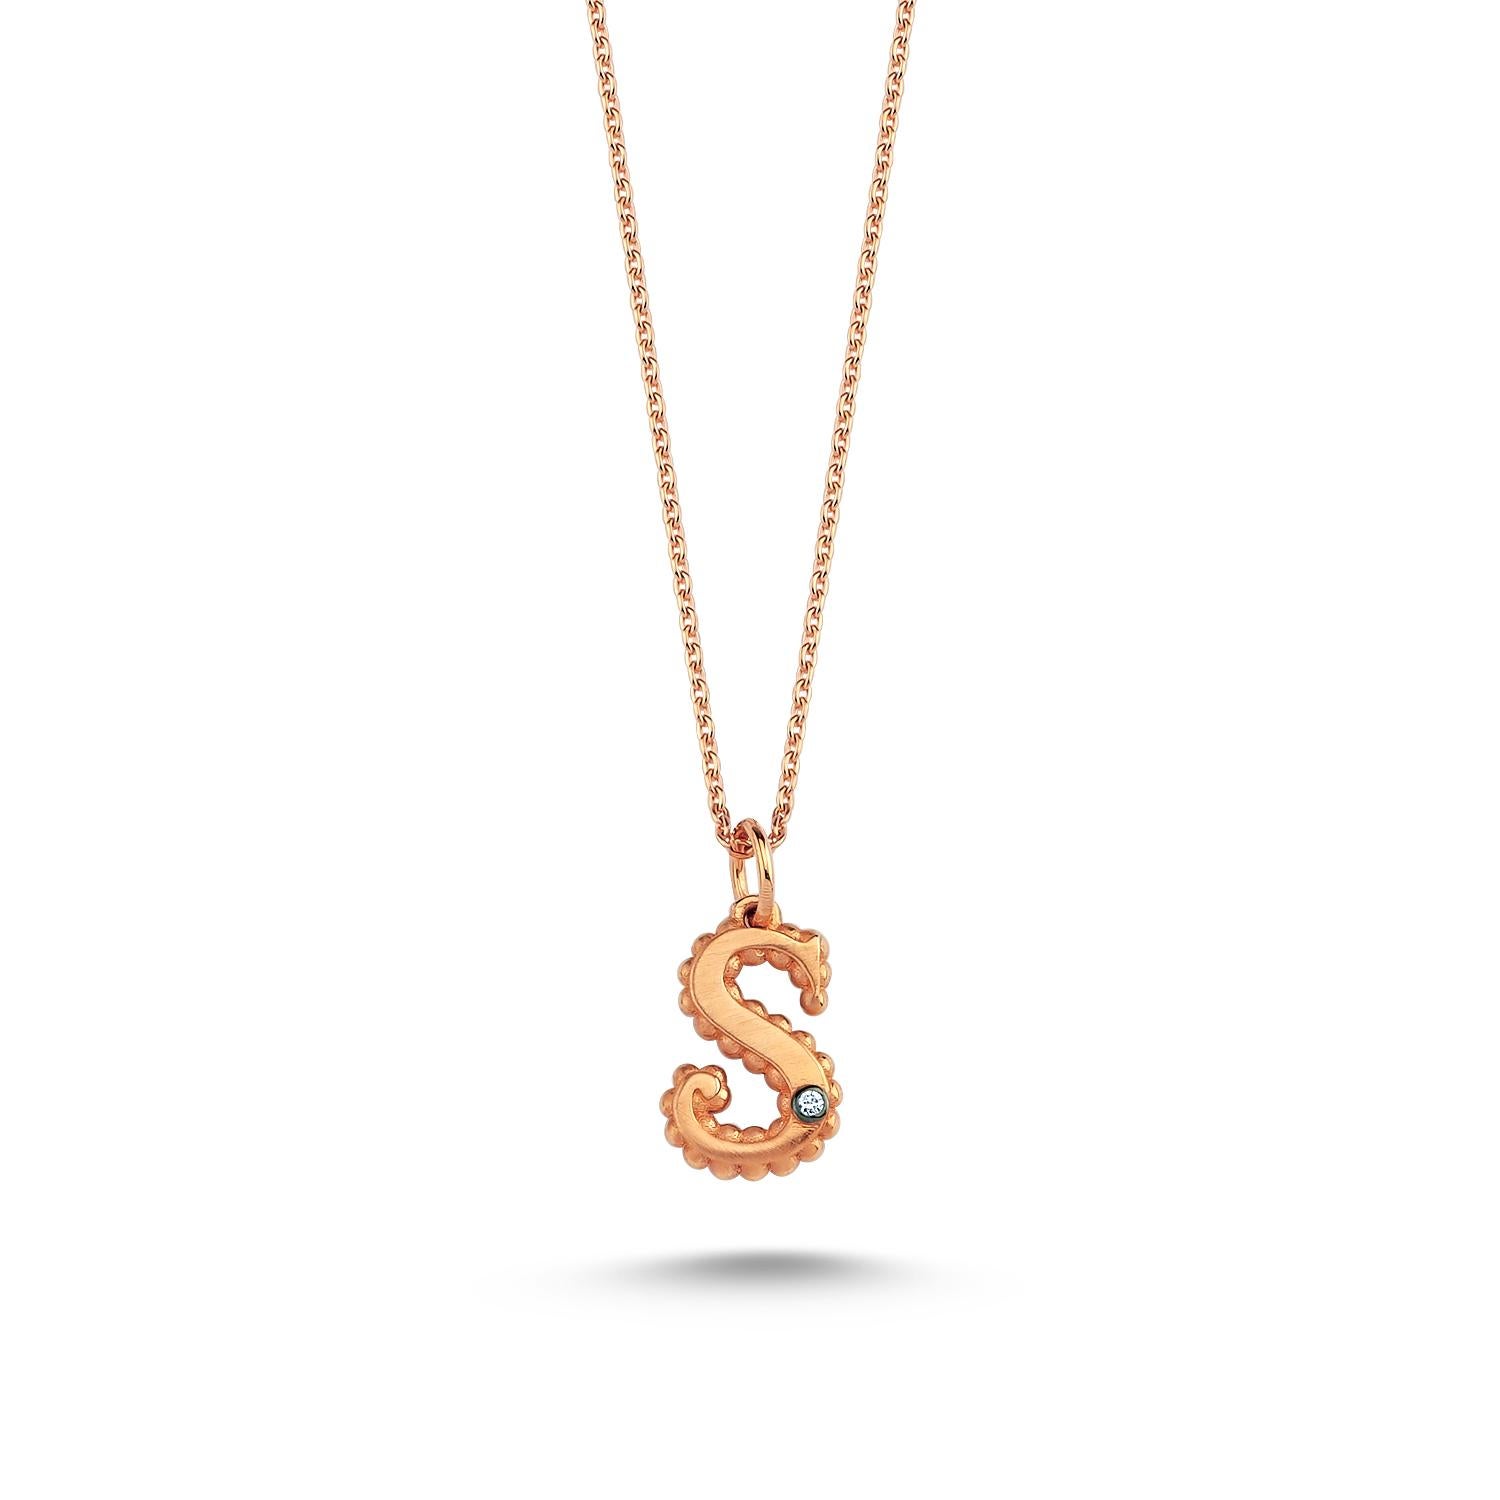 S large necklace in 14k rose gold with white diamond by Selda Jewellery

Additional Information:-
Collection: Letter collection
14K Rose gold
0.01ct White diamond
Pendant height 1cm
Chain length 44cm